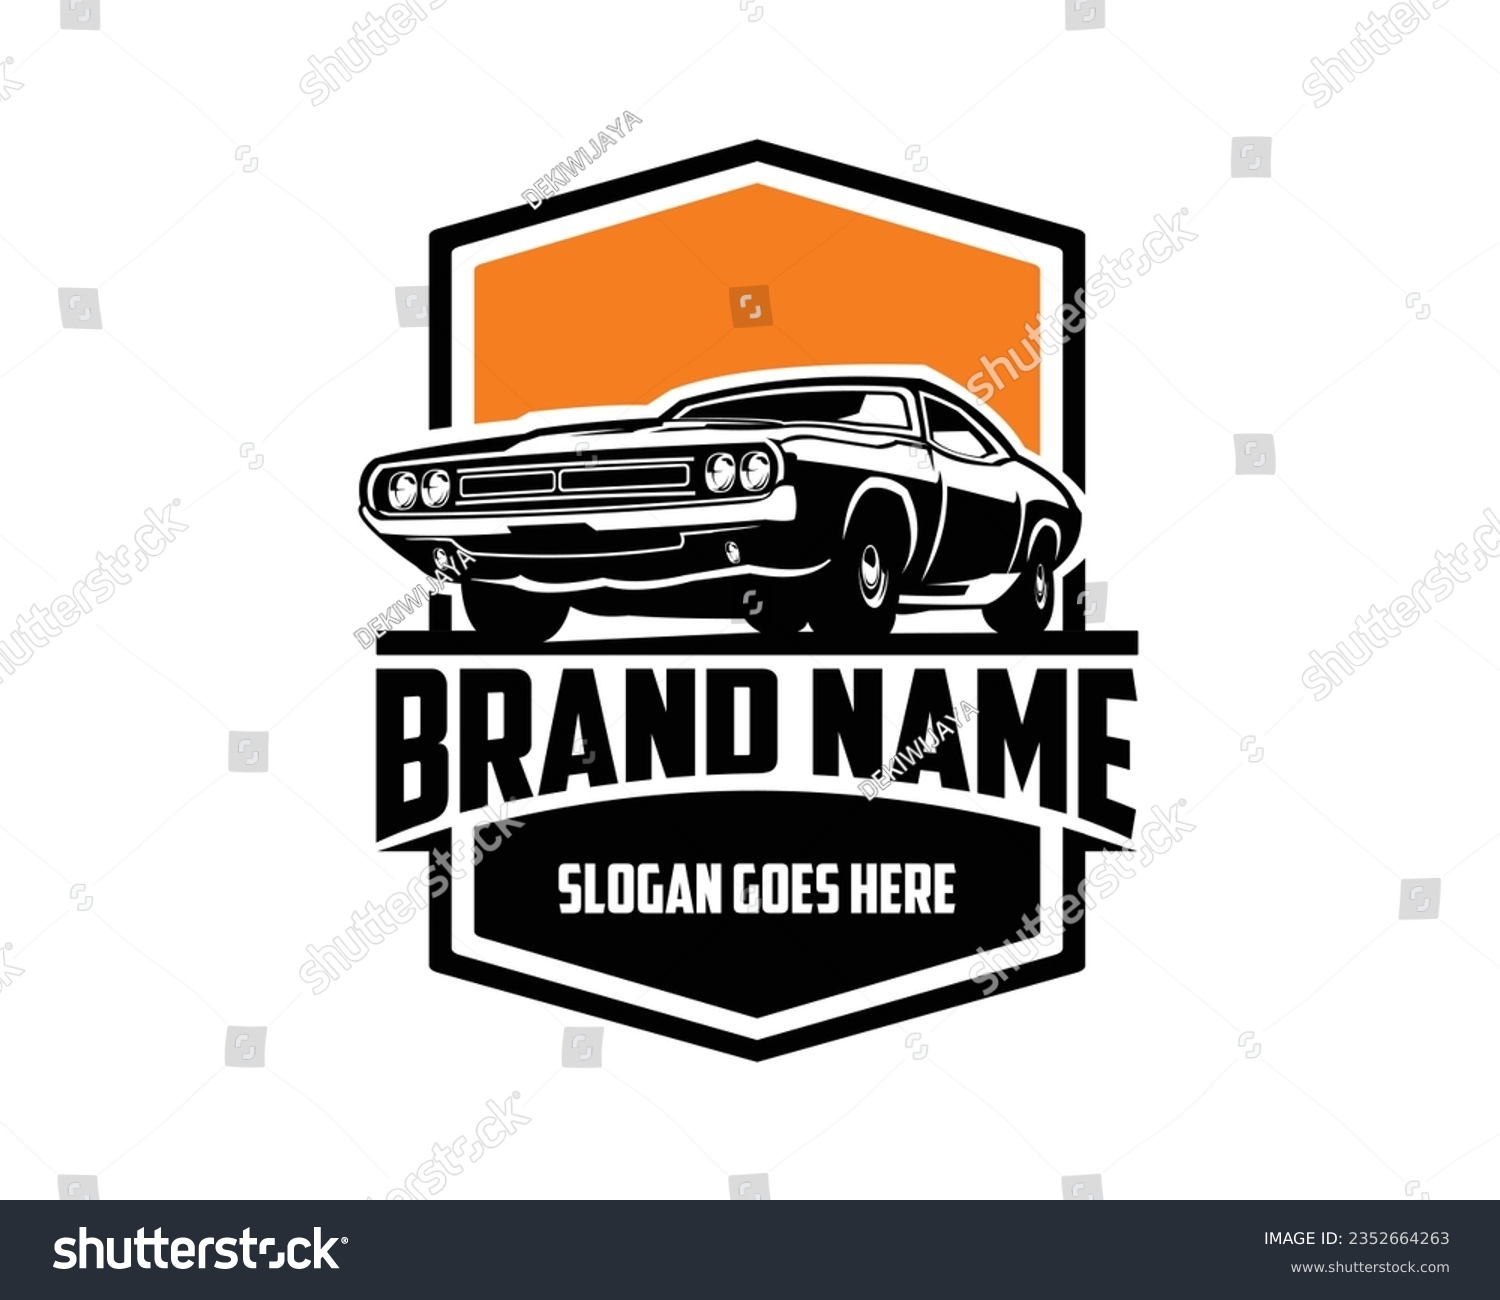 SVG of vector illustration of a 1969 dodge super bee car. silhouette vector design. appear from the side with a view of the evening sky. Best for logo, badge, emblem, icon, design sticker, vintage  svg